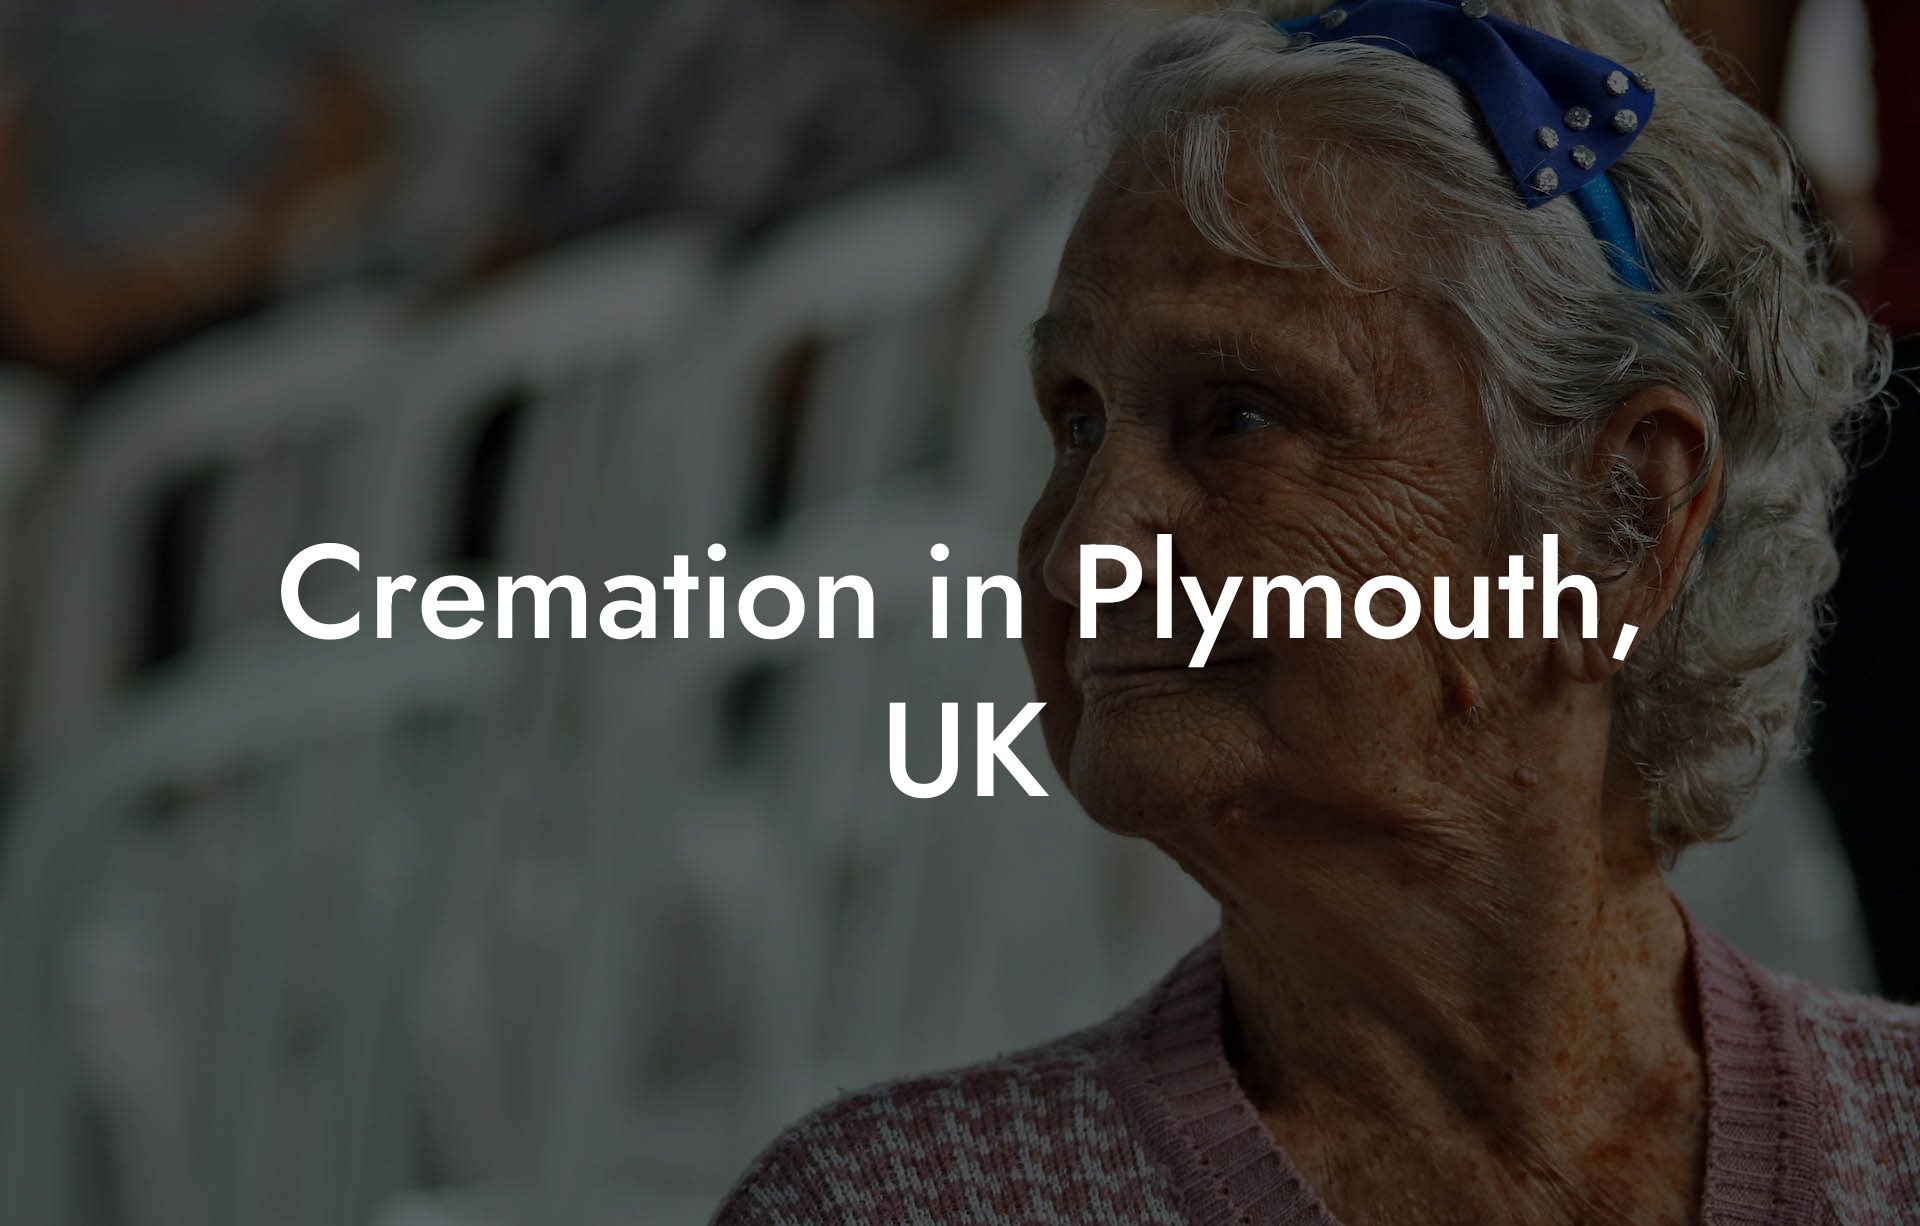 Cremation in Plymouth, UK